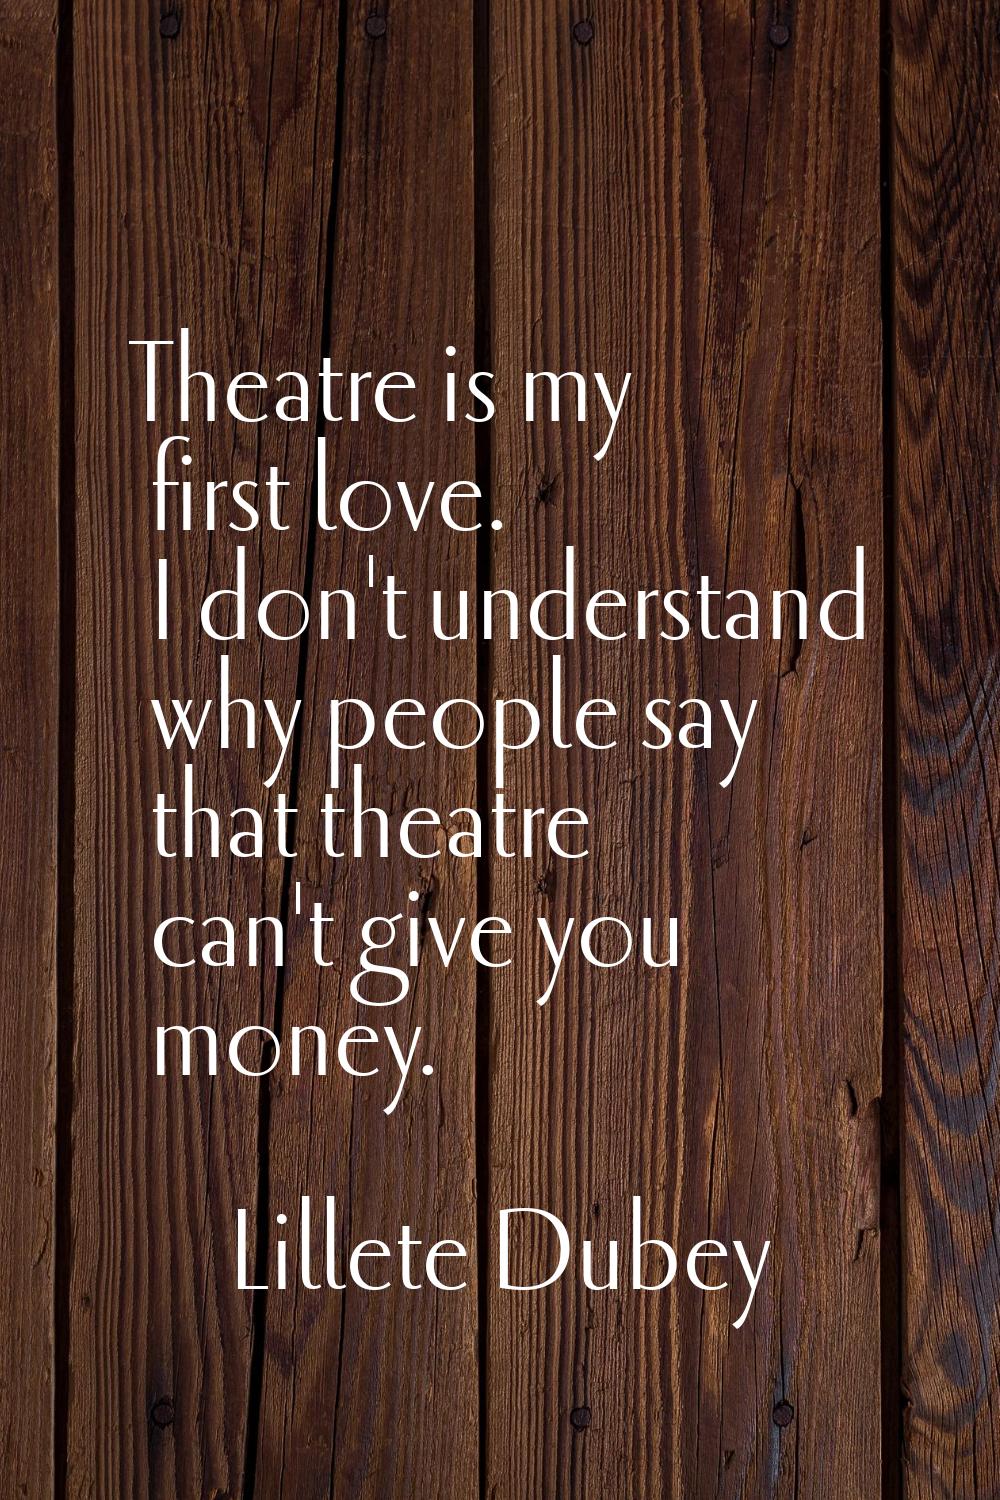 Theatre is my first love. I don't understand why people say that theatre can't give you money.